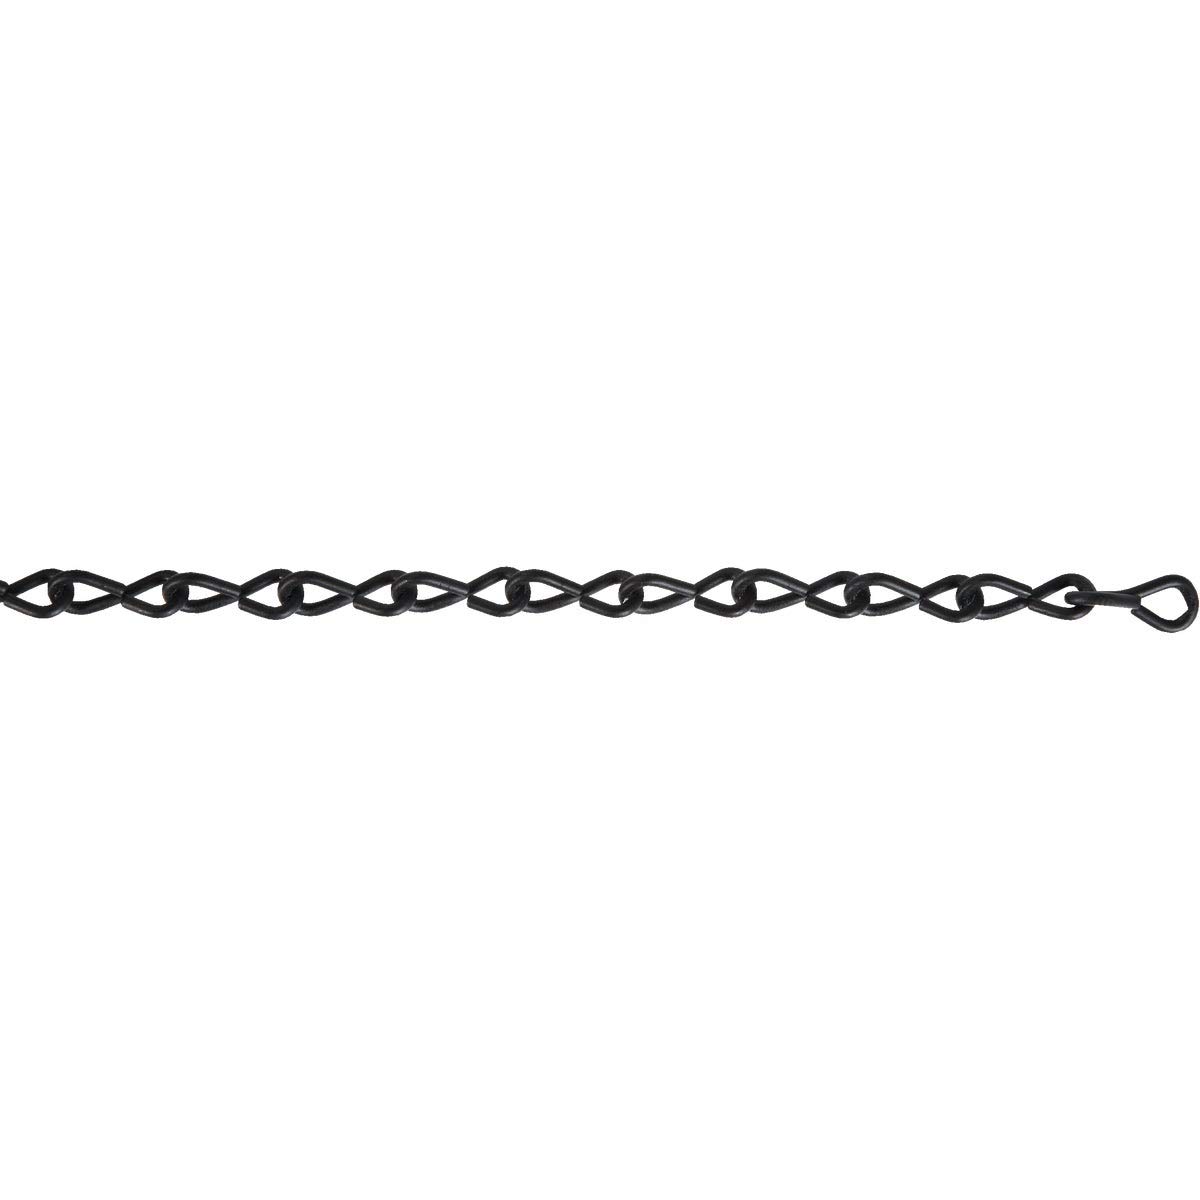 Campbell Tool Chain Single Jack Link #14 Black 190' Per Roll